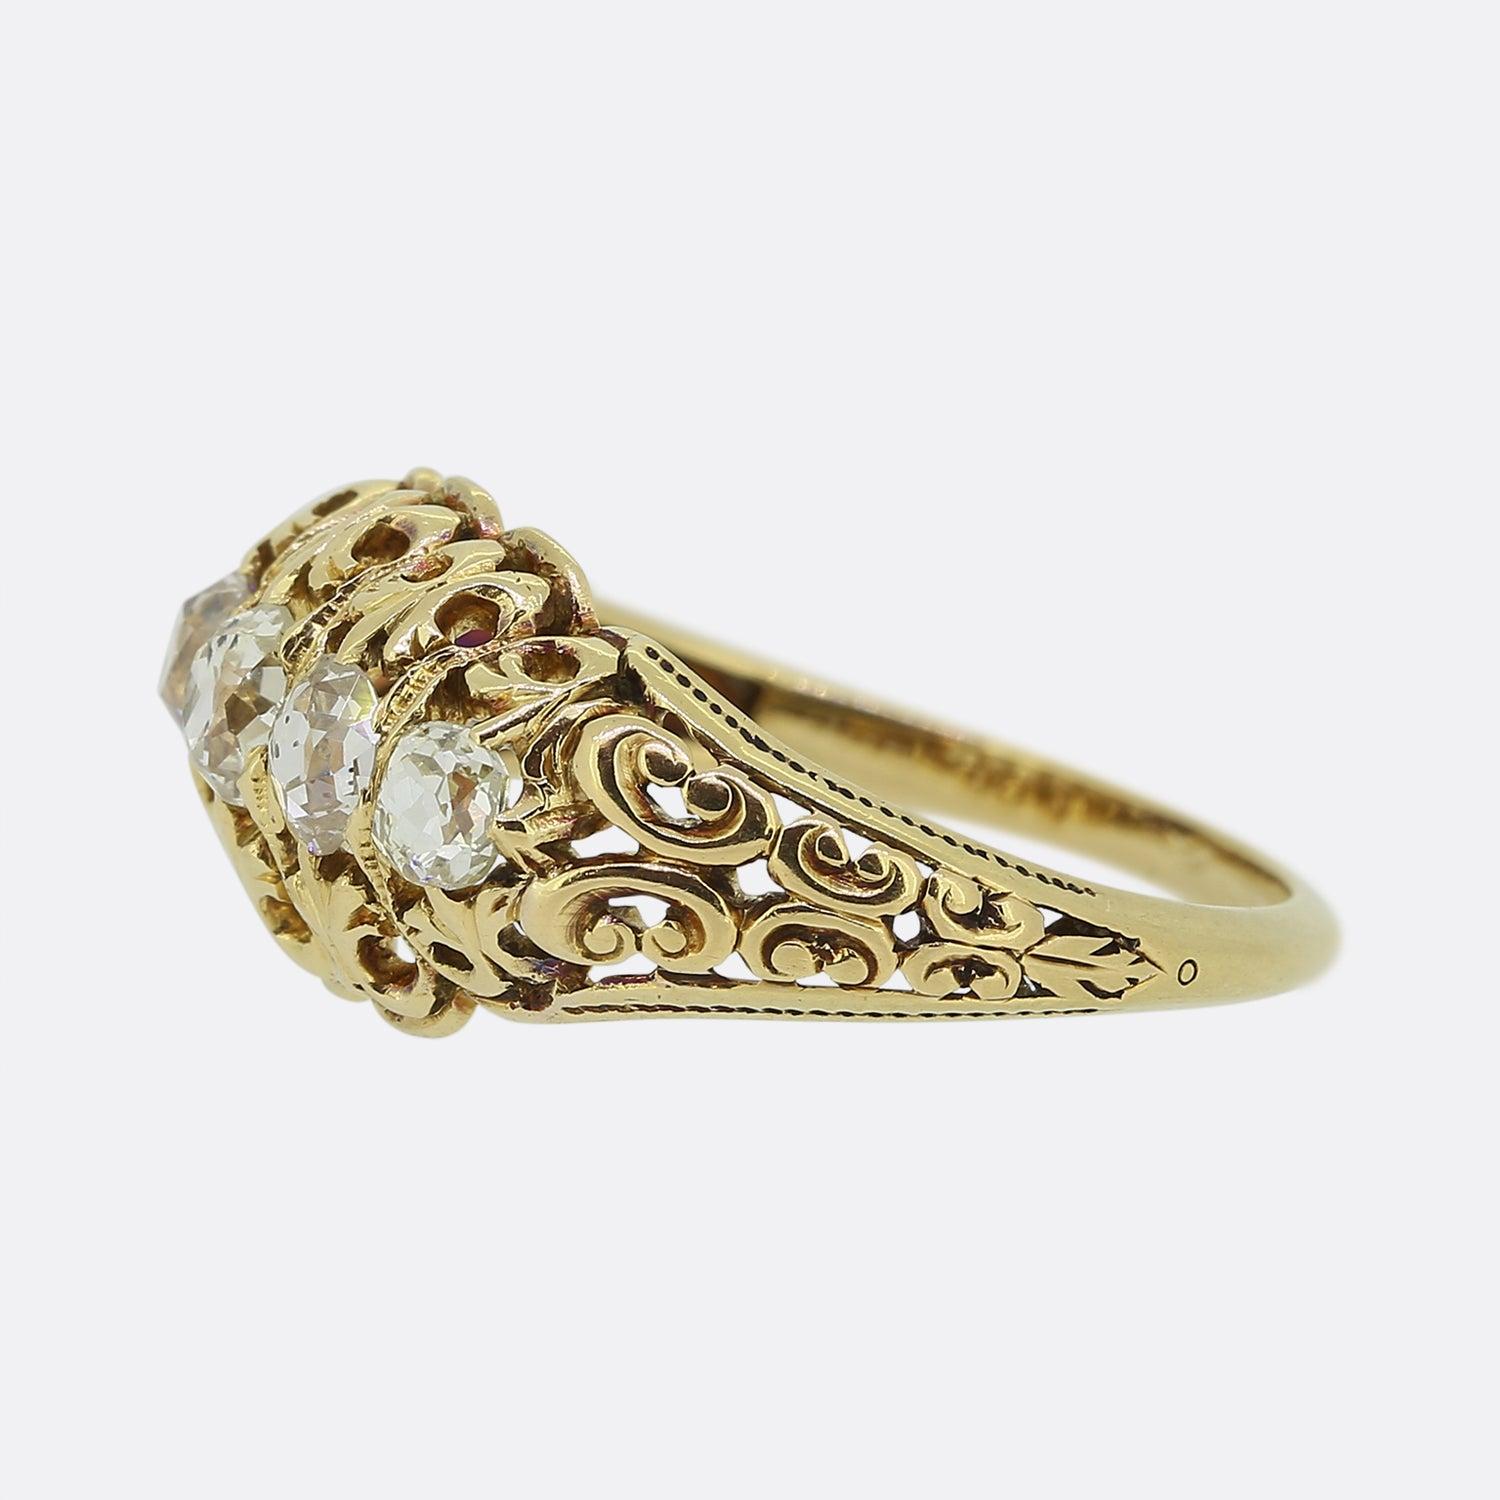 This is a wonderful 18ct yellow gold late Victorian ring. The ring features five graduated old cut diamonds with the largest of which in the centre. The ring has been expertly crafted with pierced Fleur De Lis detail and we have never had the